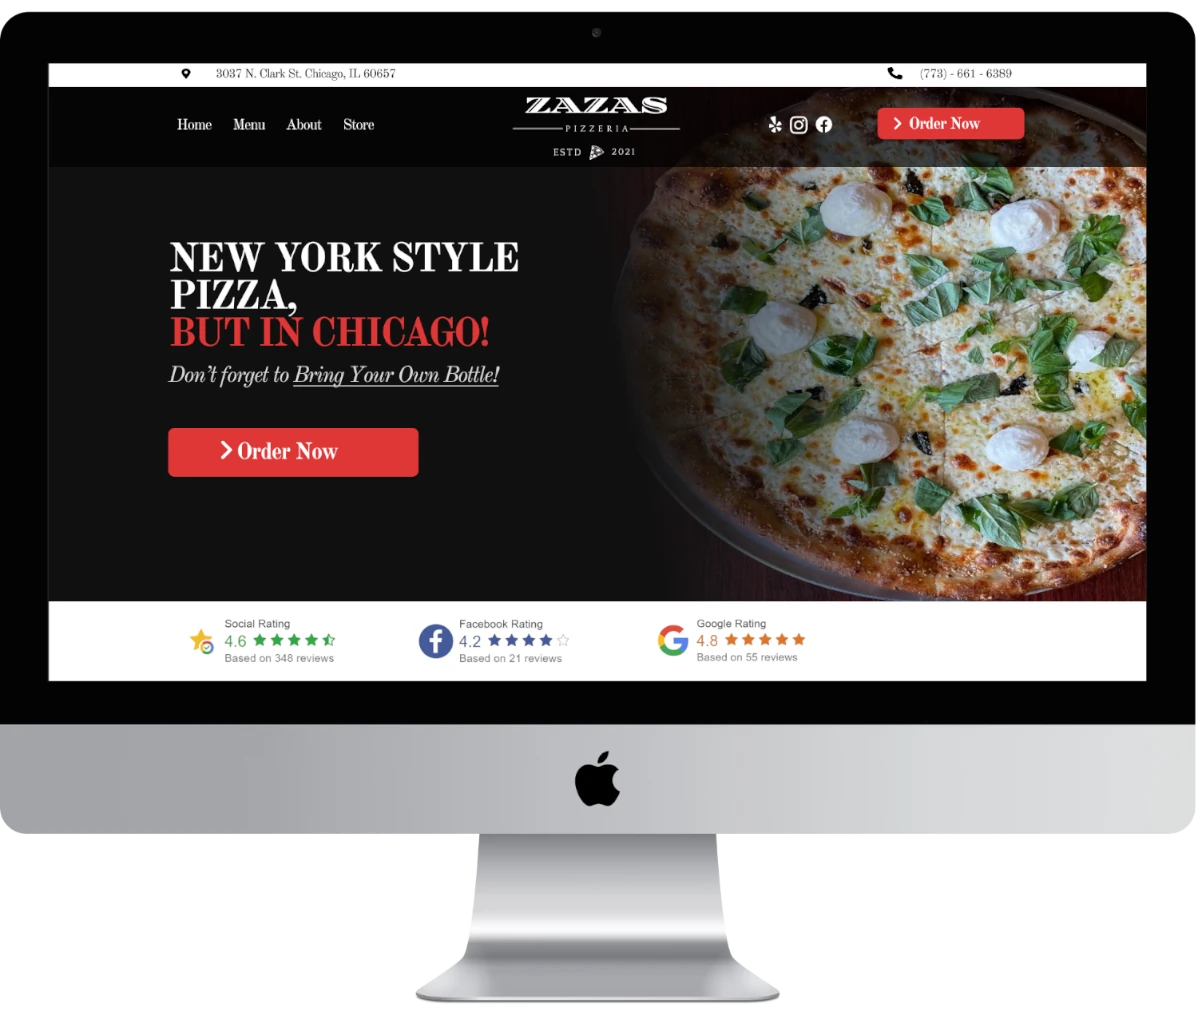 Clean and slick website for a pizza restaurant.